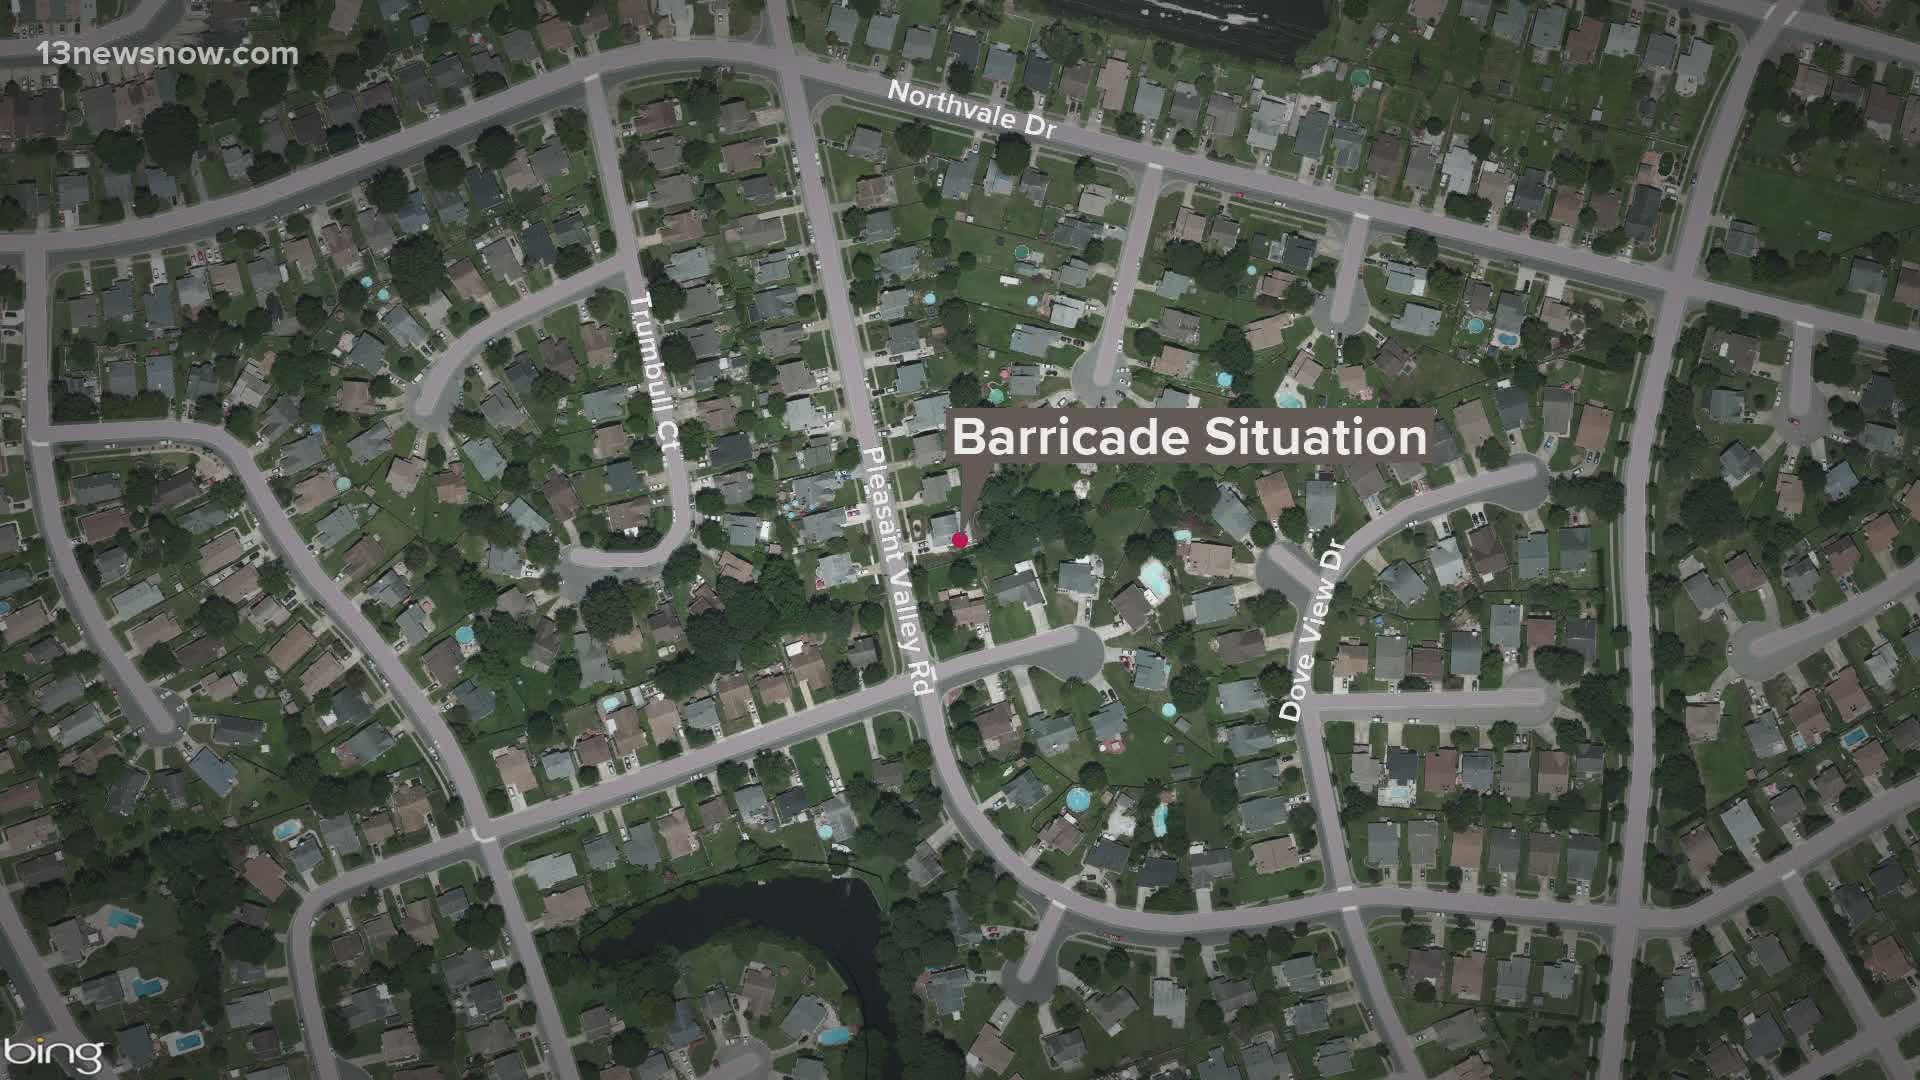 A barricade situation in Virginia Beach is over, and a suspect in custody.